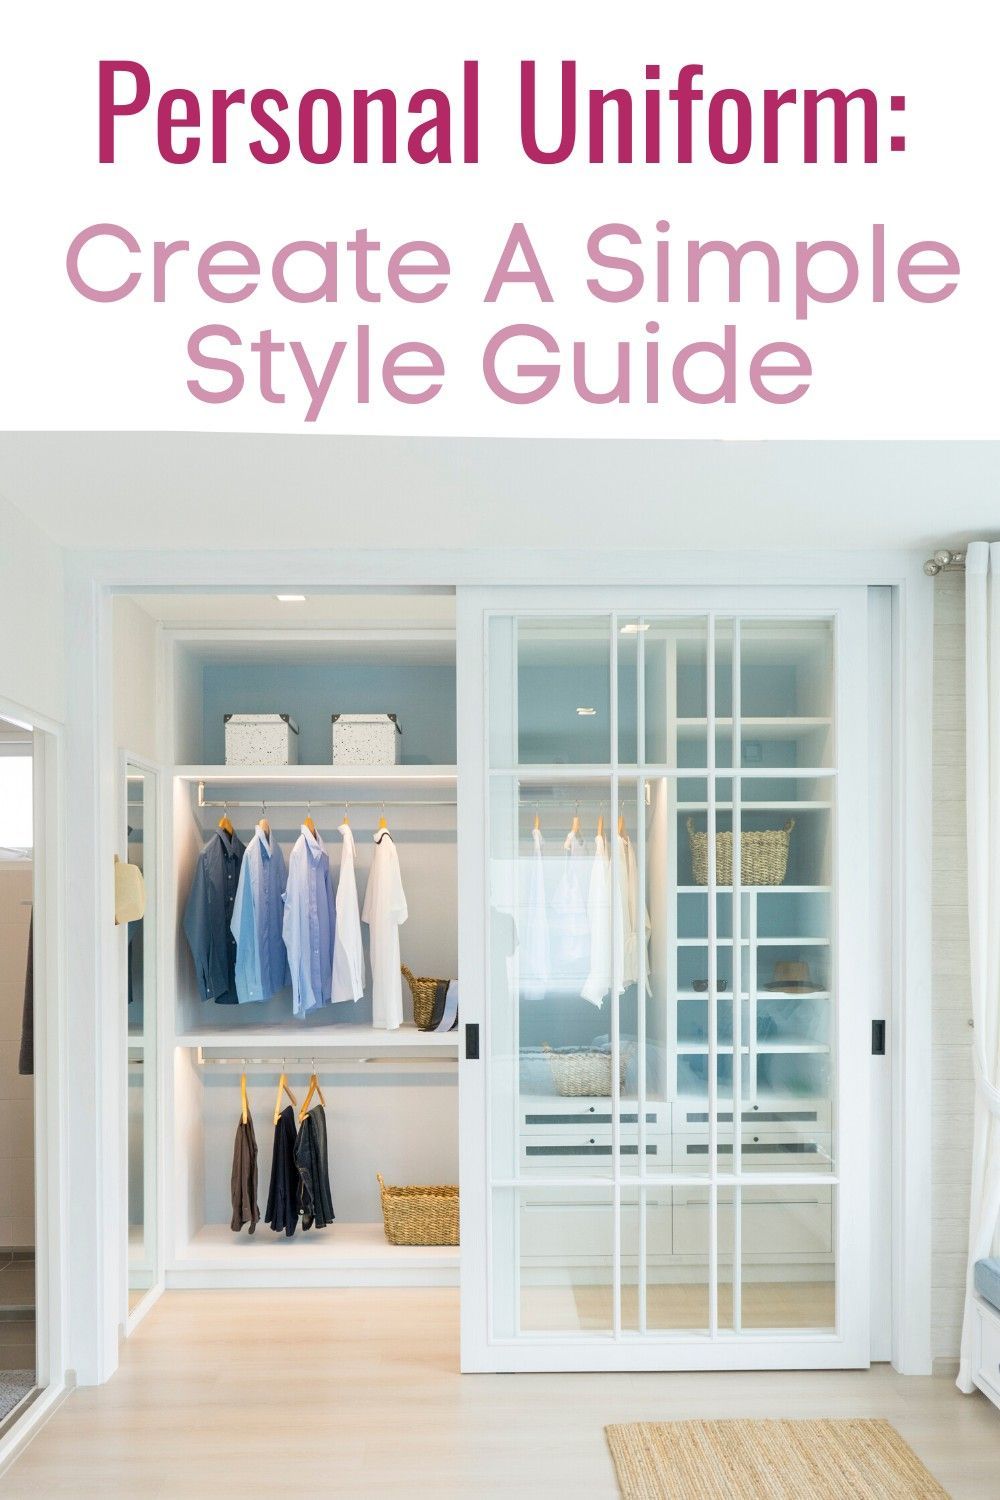 Personal Uniform: Create A Simple Style Guide - Personal Uniform: Create A Simple Style Guide -   14 simple style Guides ideas